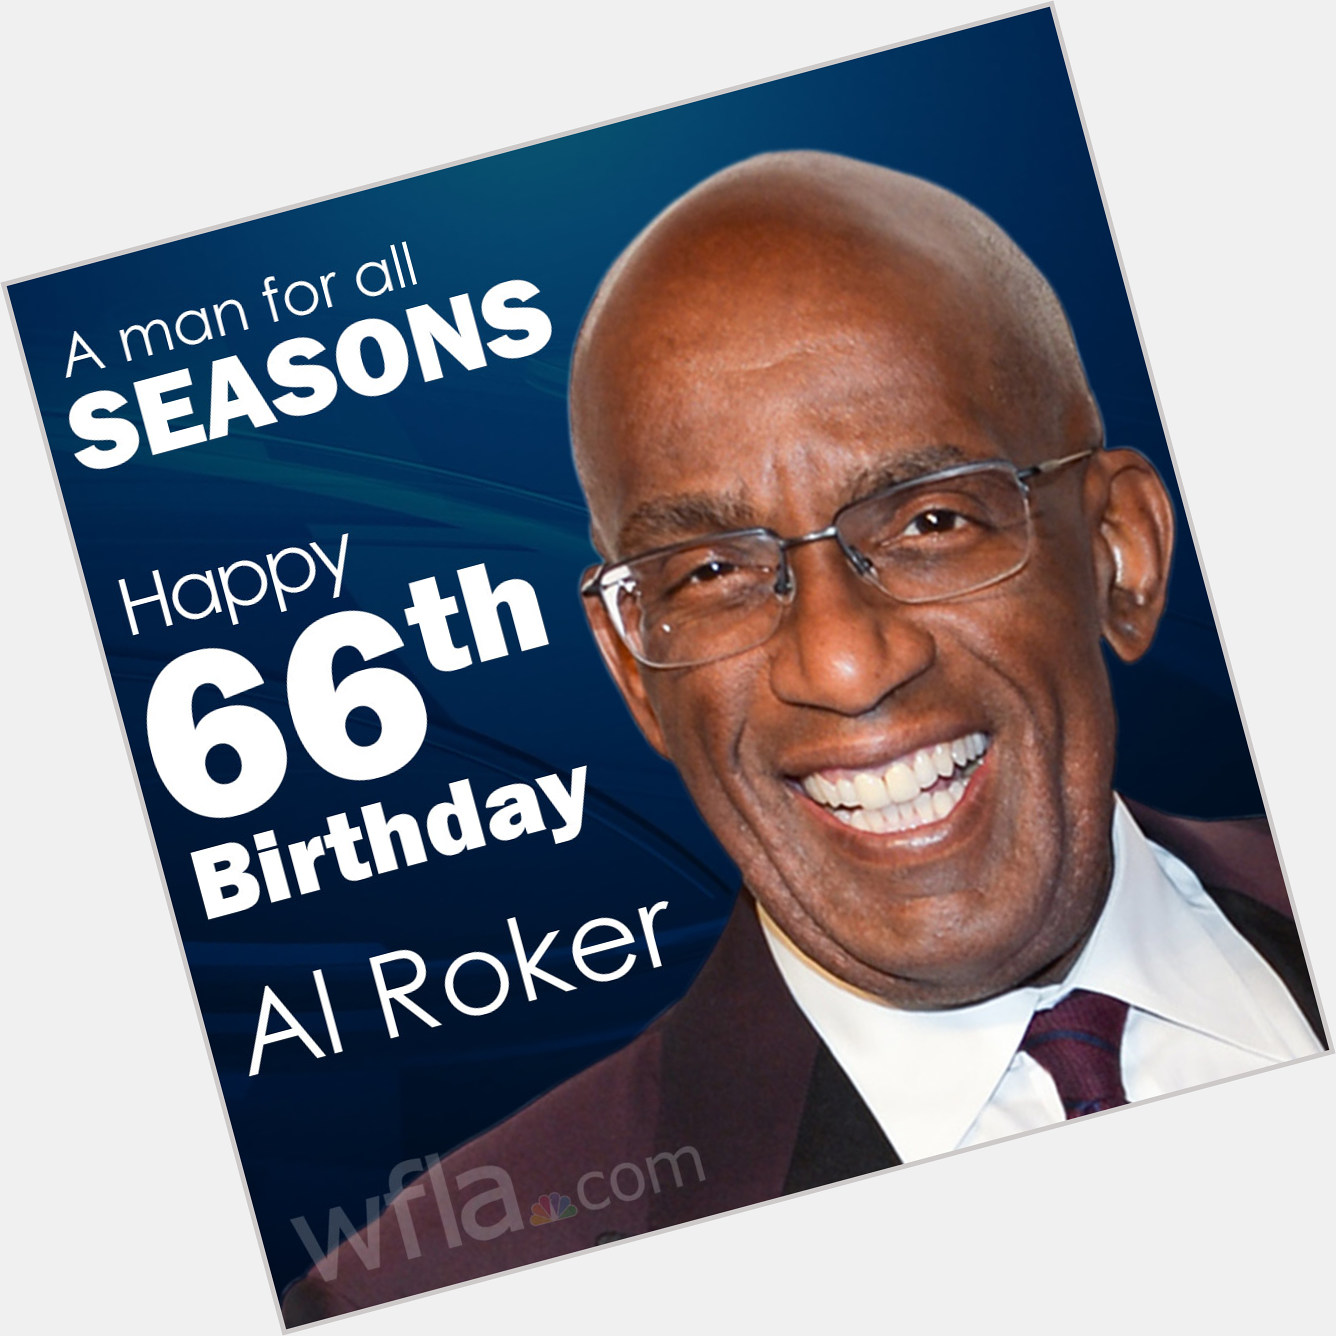 Happy Birthday, Al Roker! Thanks for making our neck of the woods a better place.  